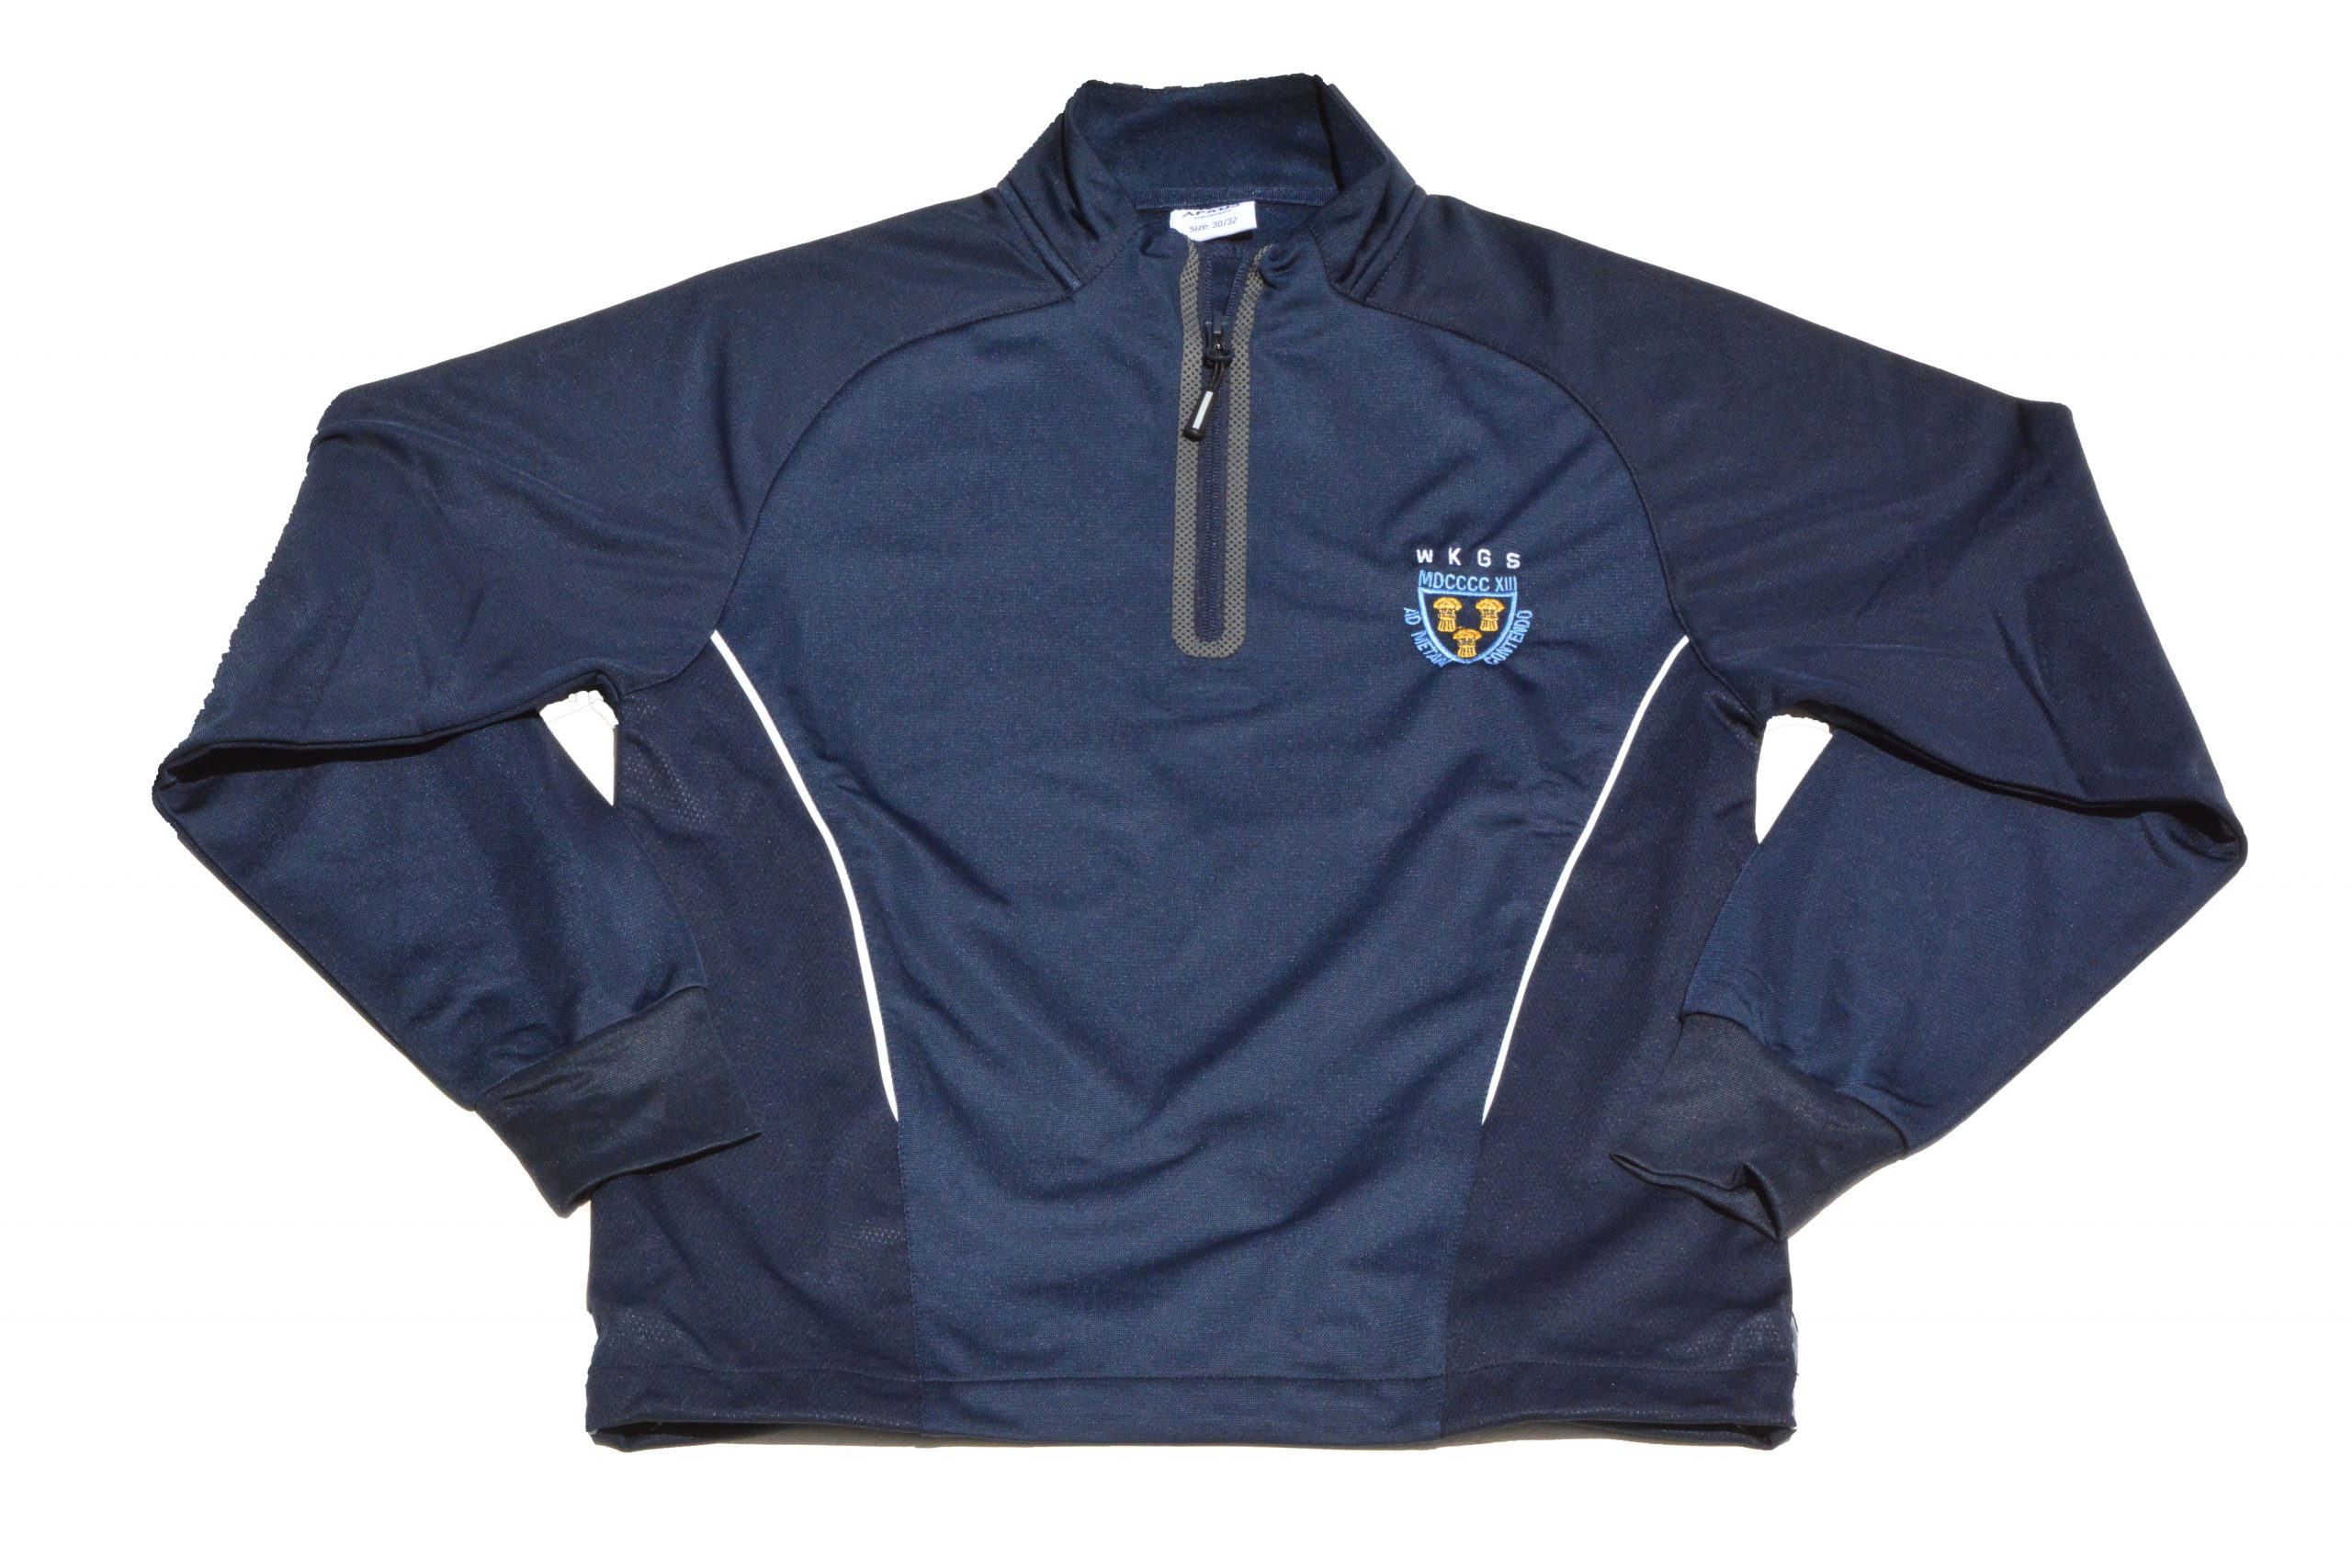 WEST KIRBY TRAINING TOP - Cain of Heswall